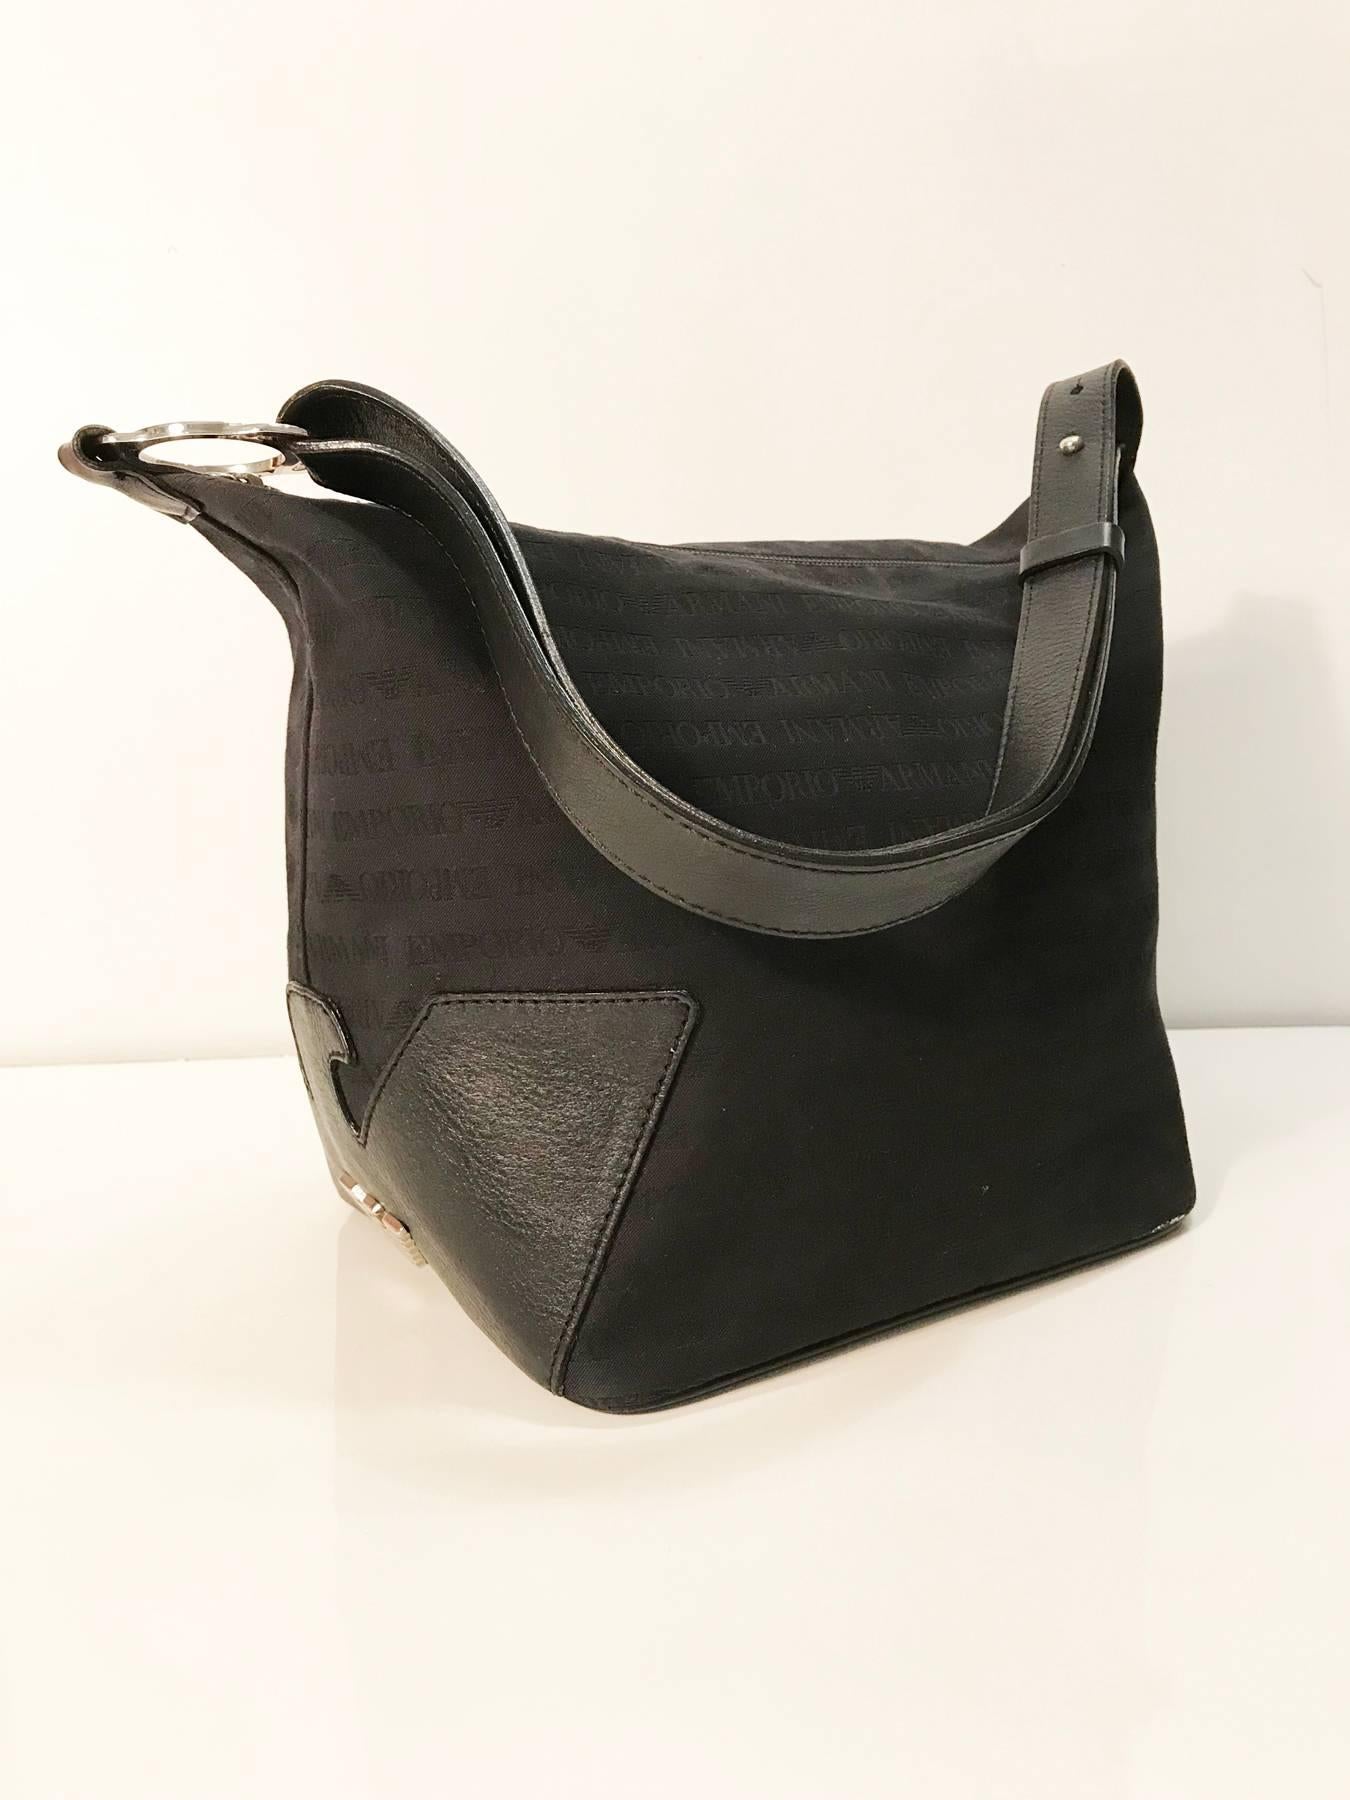 This Emporio Armani hobo bag is kind of a square sack, it is made of black canvas with Armani monogram pattern. The bottom and half of one side is made of quality black leather in great conditions, the leather cut the logo on the side and on top  of